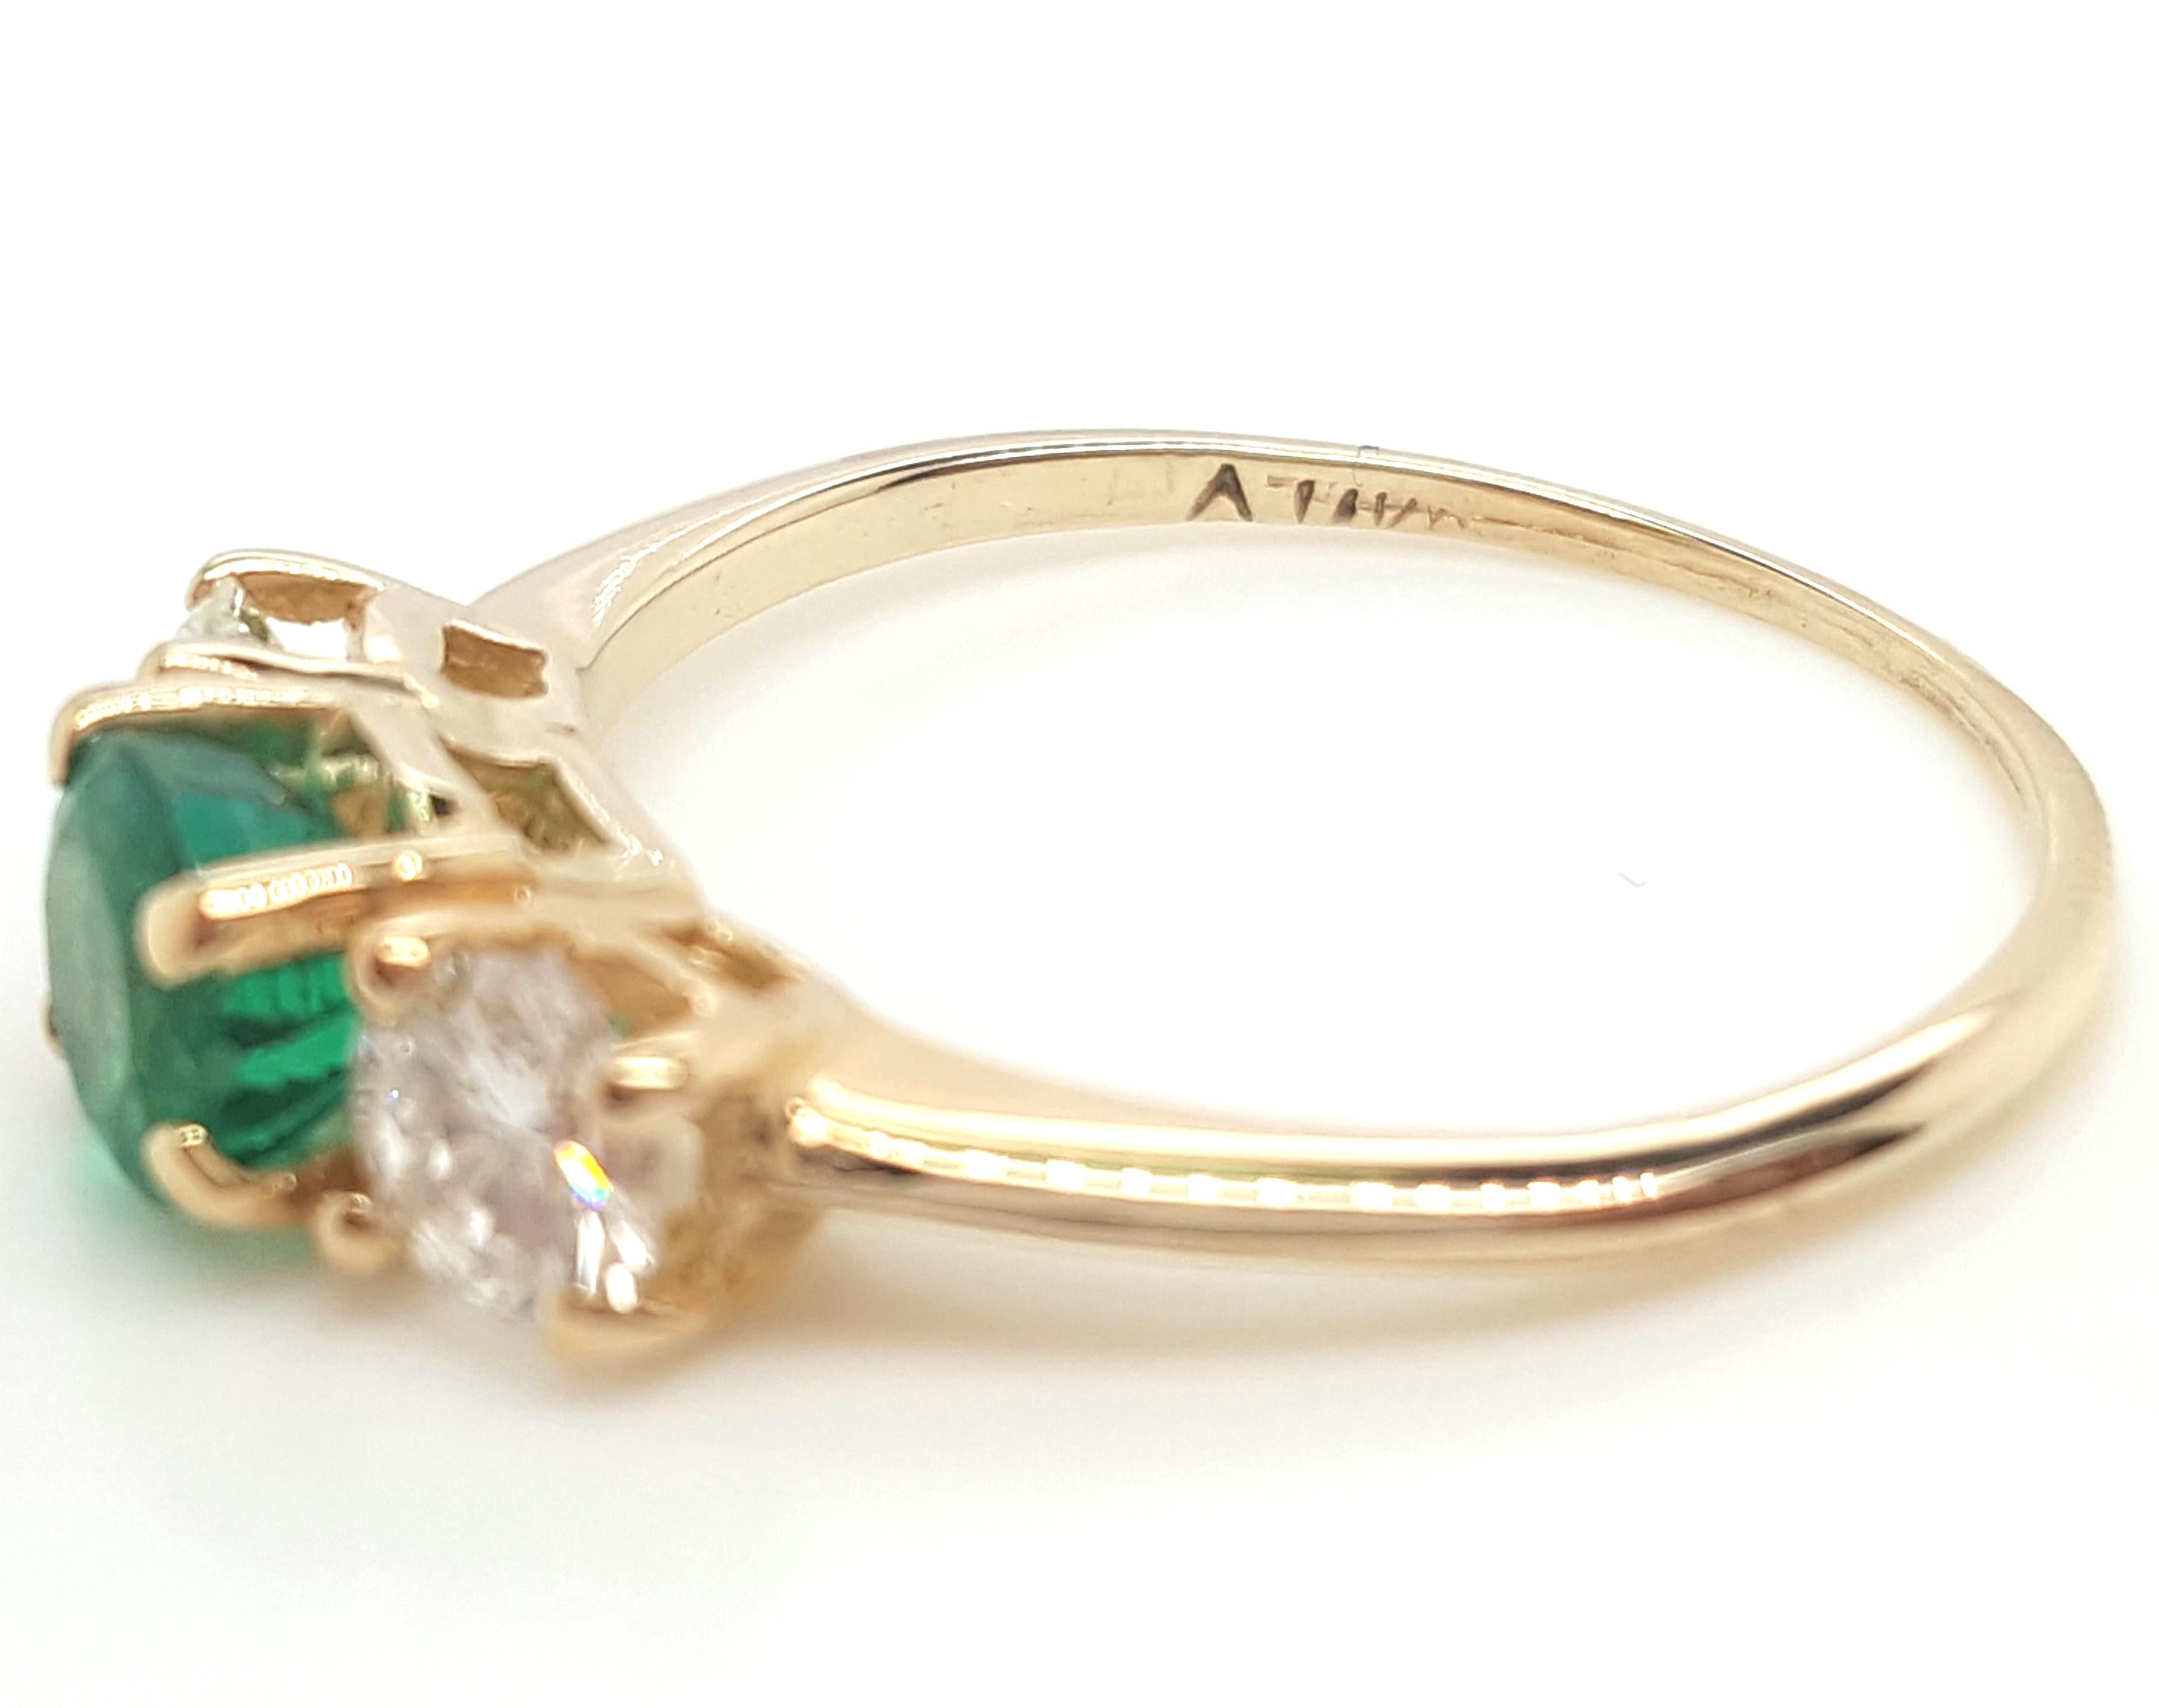 Classic 14K Yellow Gold Three-Stone Emerald and  Diamond Ring.   This classic three-stone ring is crafted in 14 karat yellow gold featuring a round emerald weighing approximately 0.56 carats,  set in a 14 karat yellow gold four prong setting,